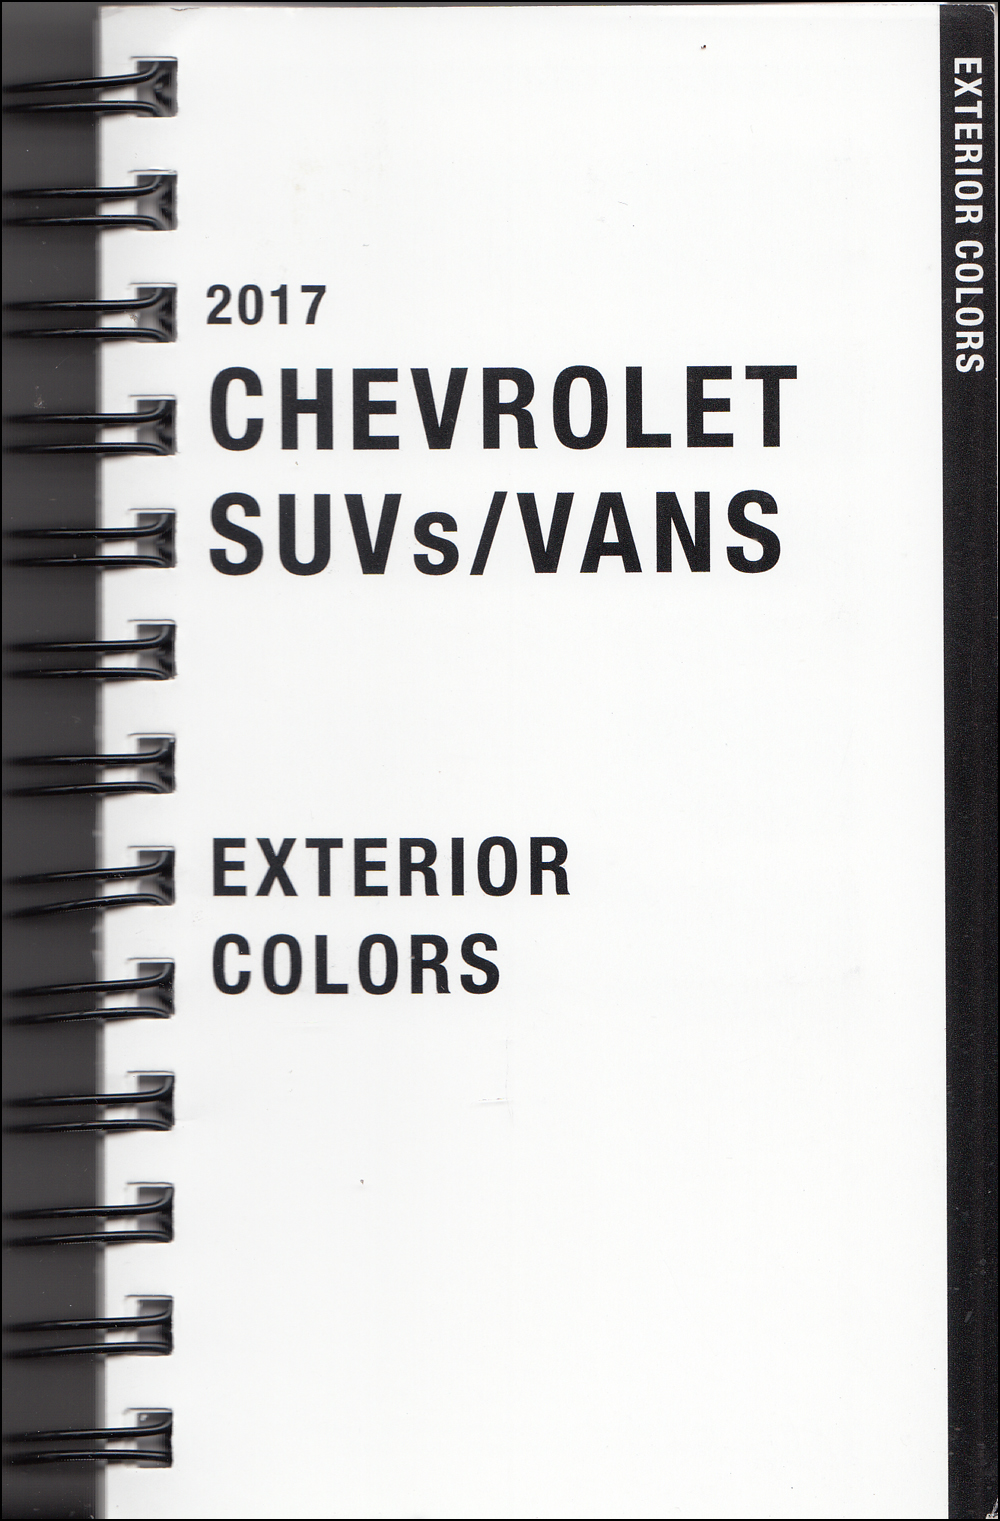 2017 Chevrolet SUV & Vans Data Book with Color & Upholstery Original